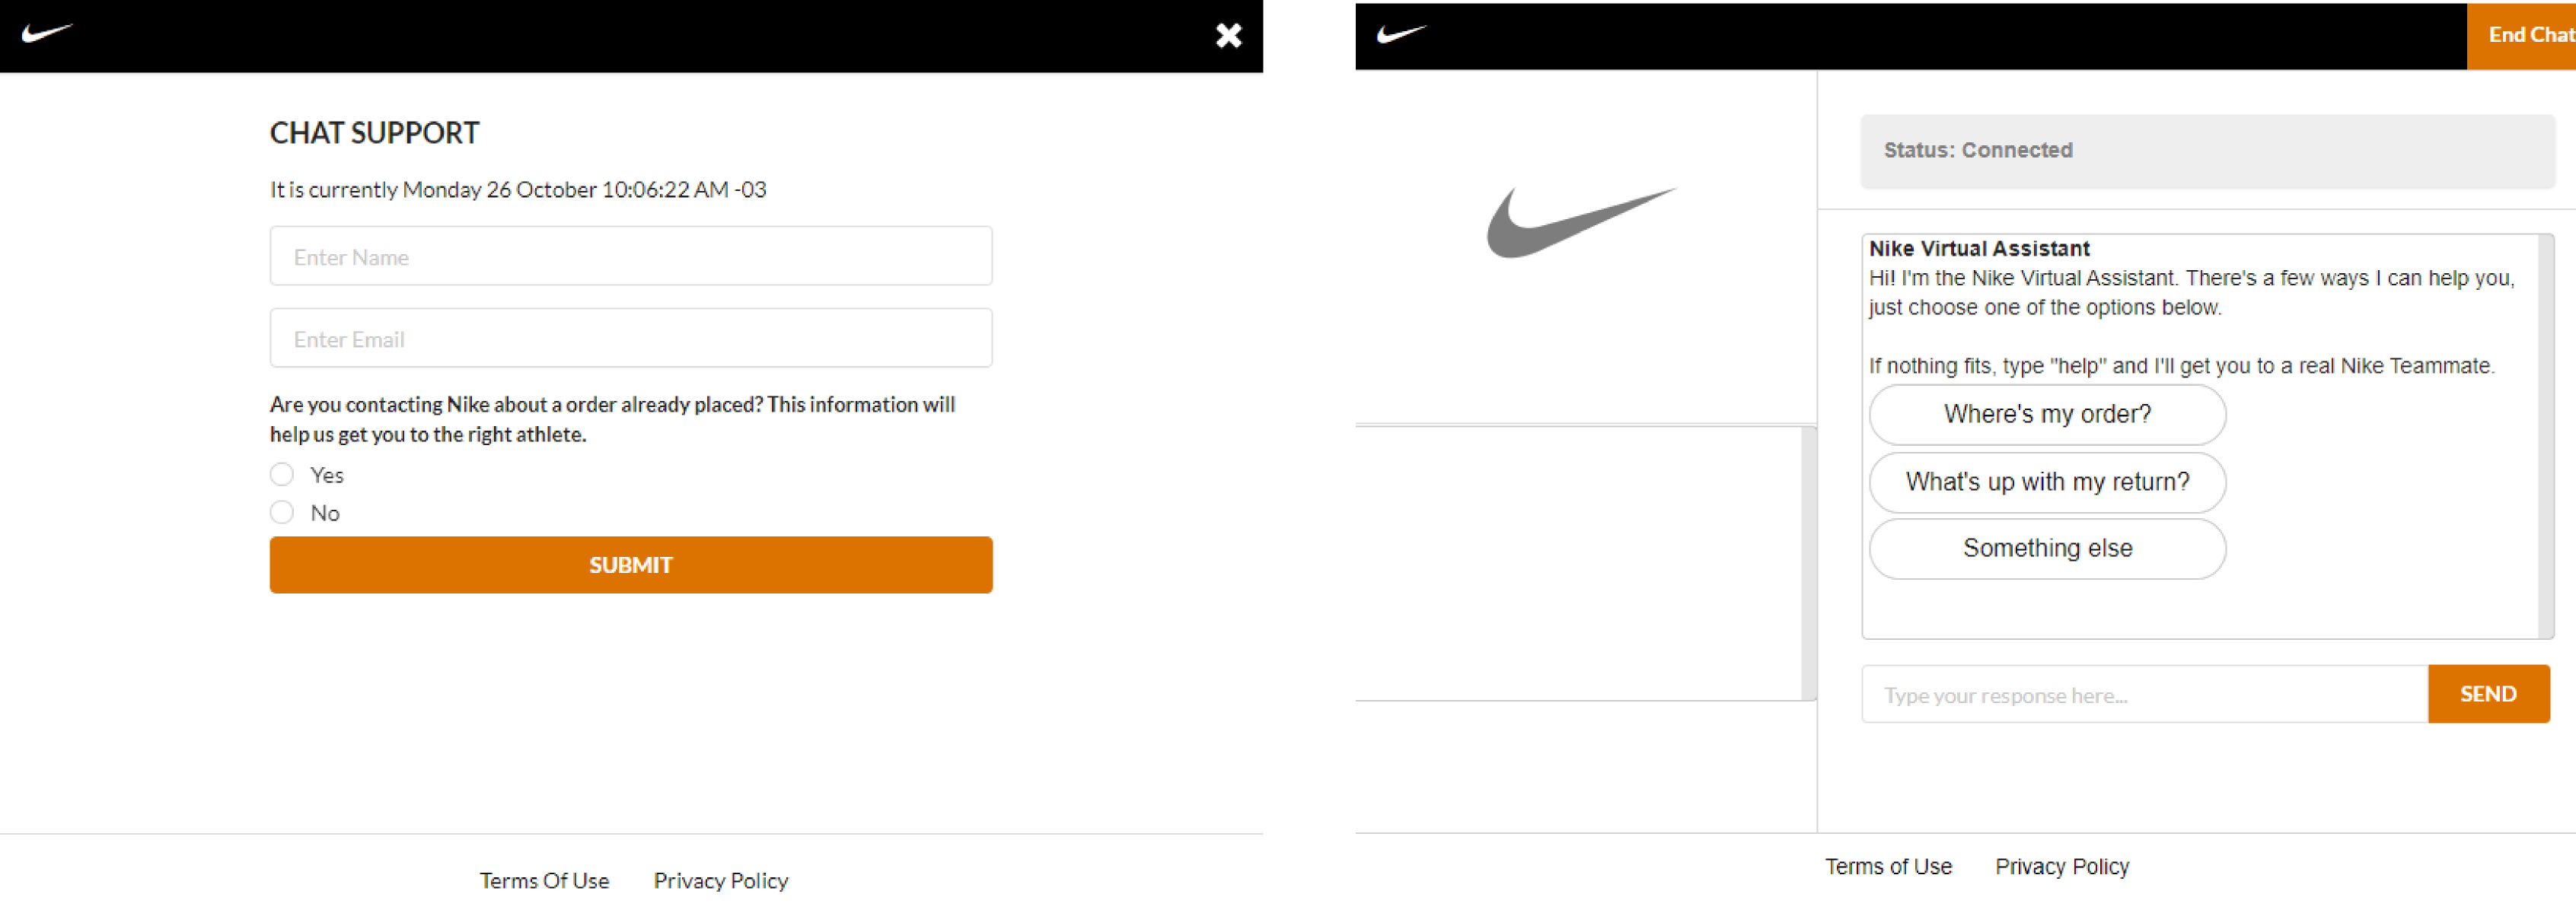 nike online chat help